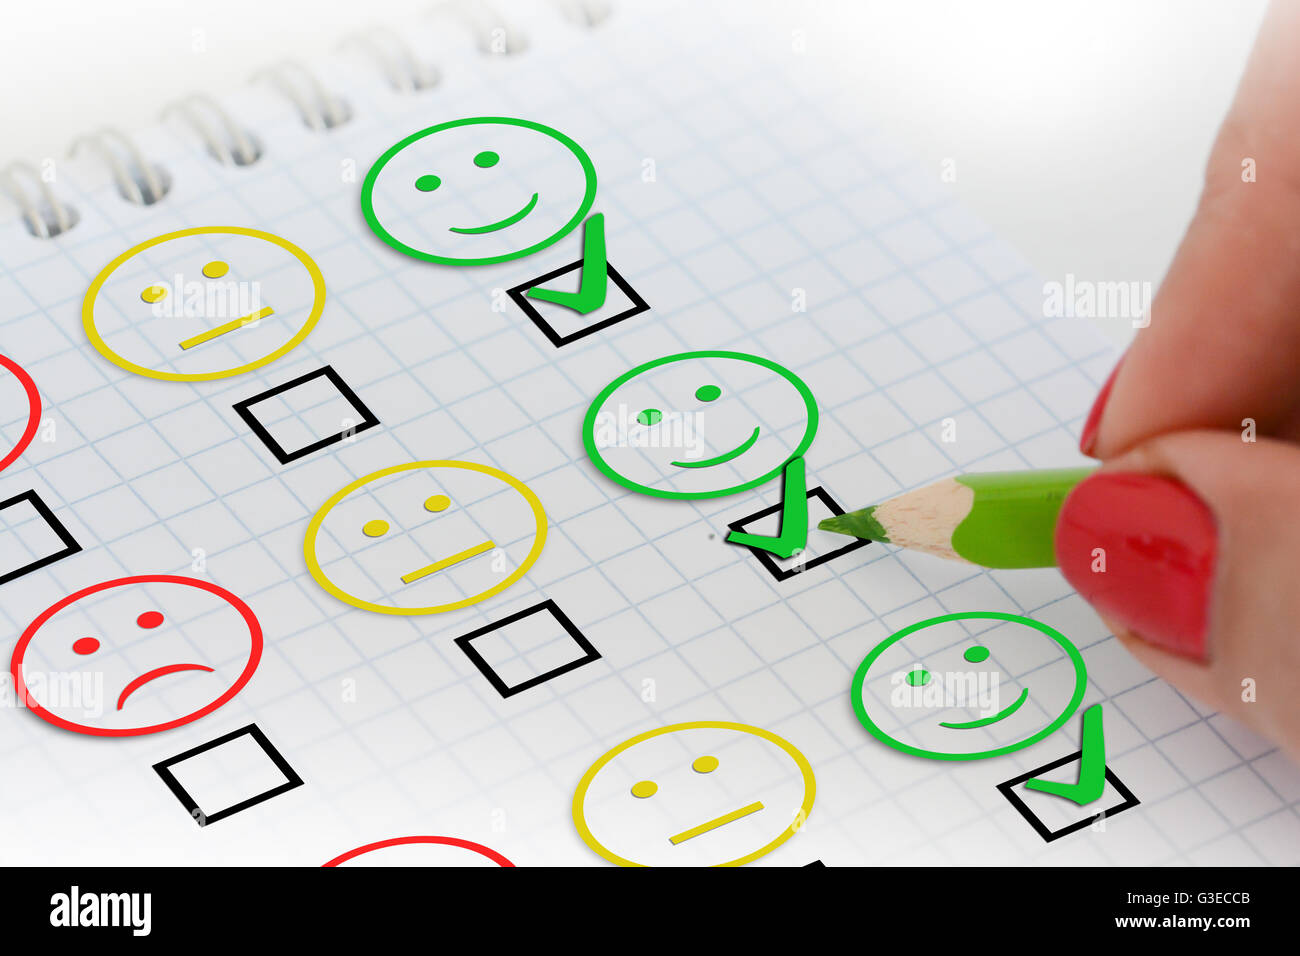 Customer satisfaction survey or questionnaire Stock Photo